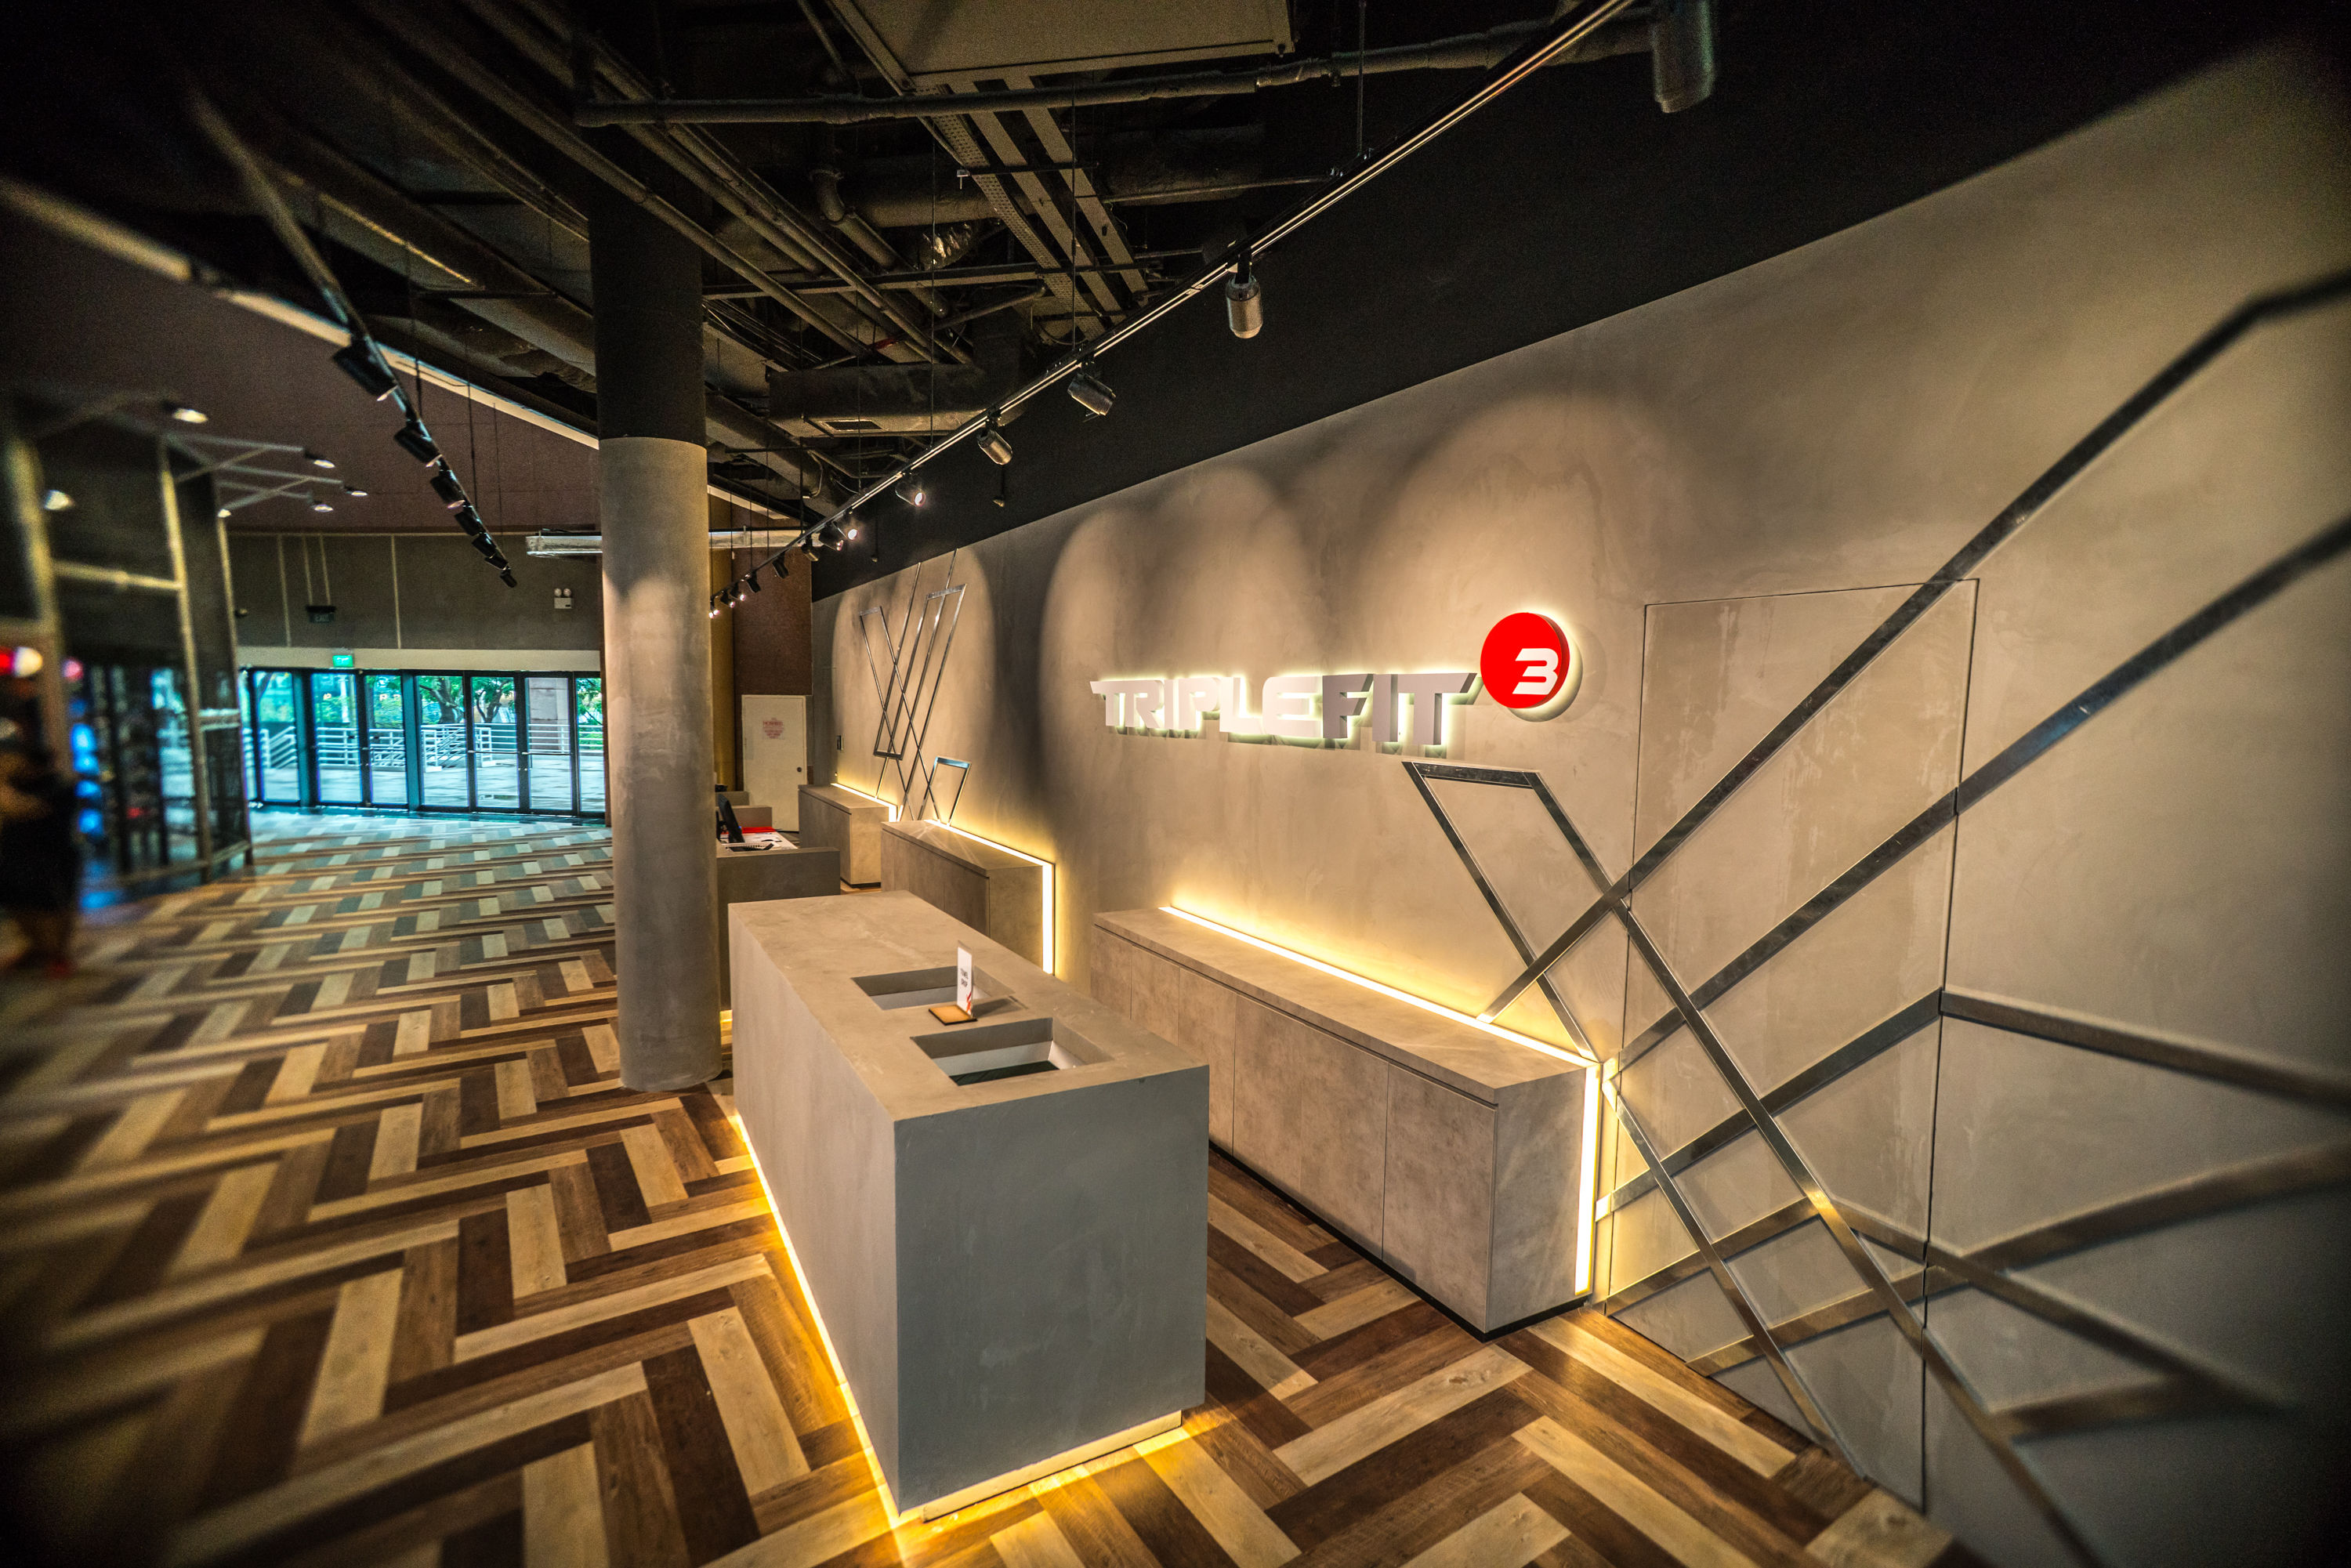 TripleFit is your new one-stop fitness solution in Singapore